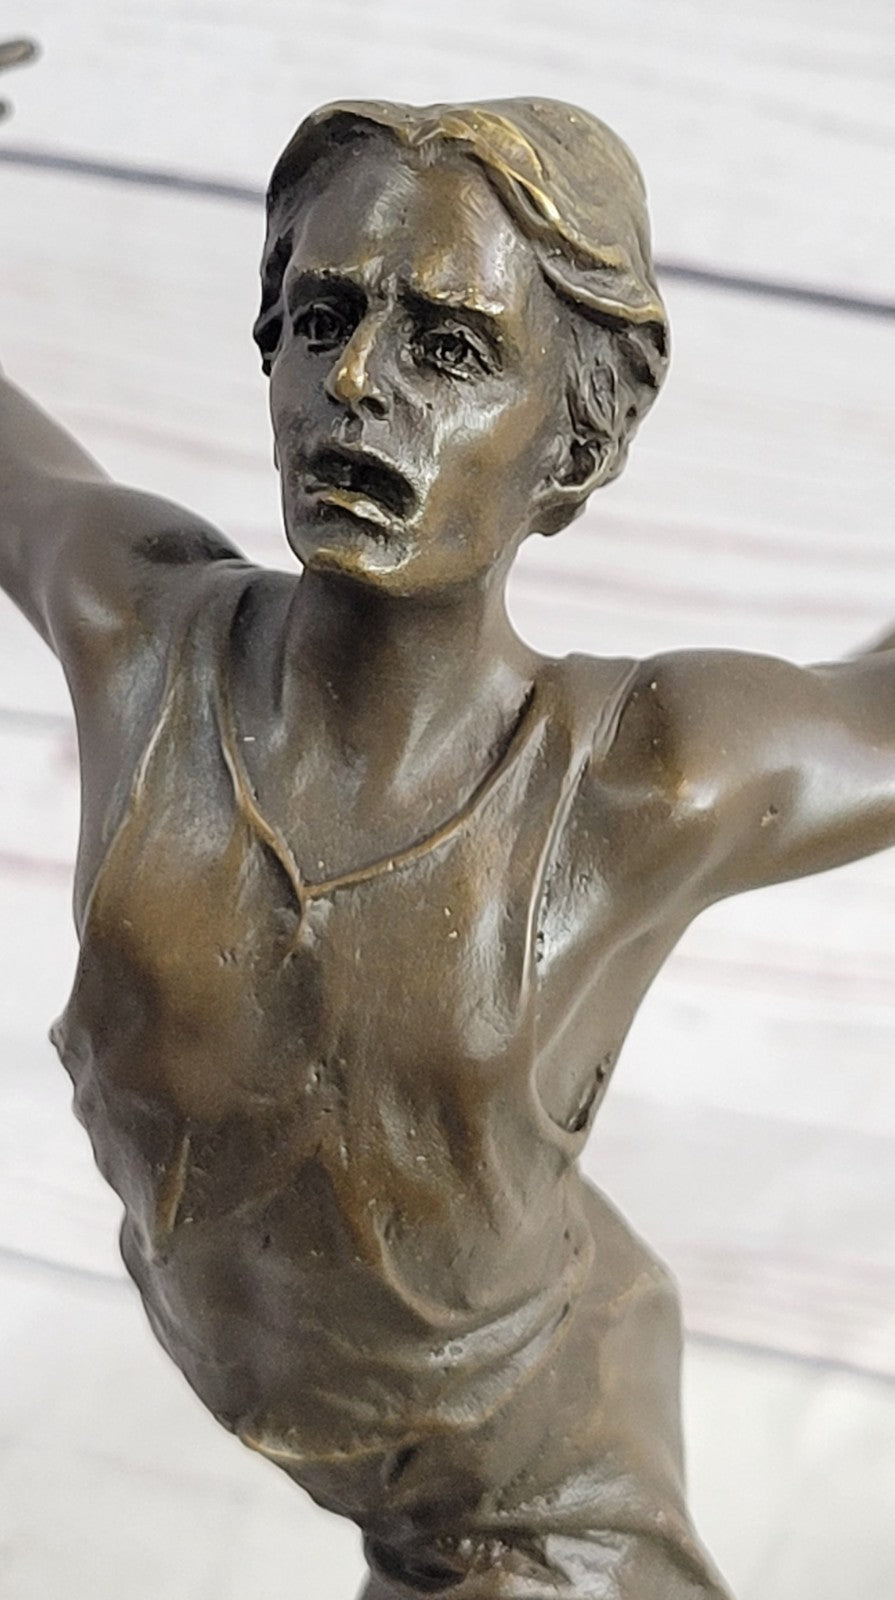 Bronze sculpture of a track and field runner in the starting Original by M.Lopez